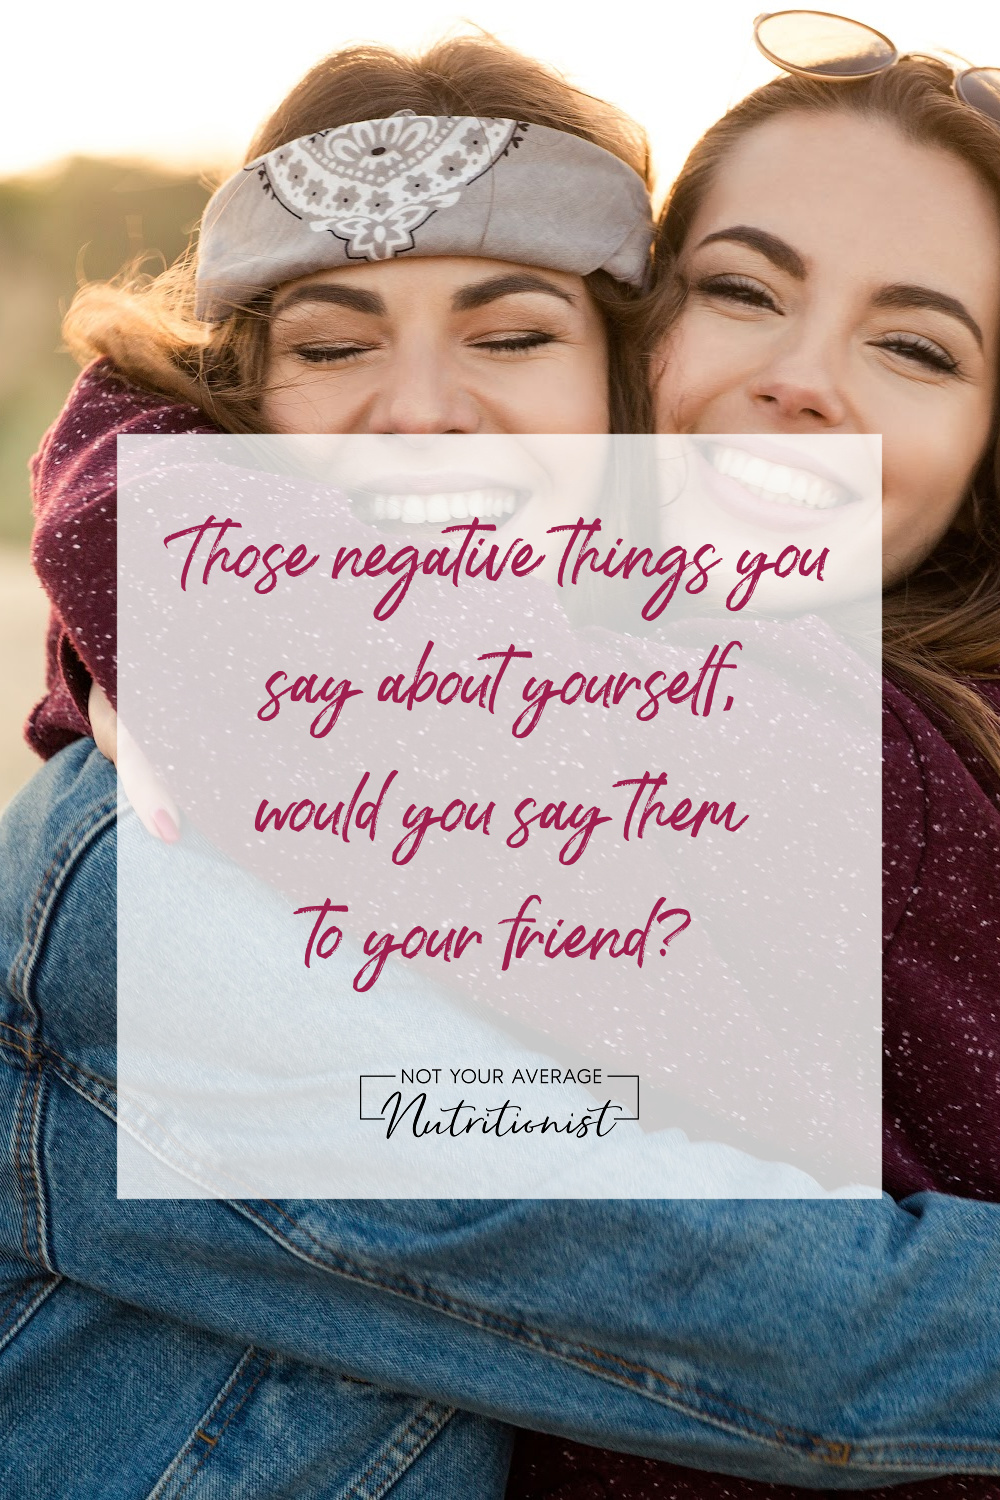 Those negative things you say about yourself, would you say them to your friend? 